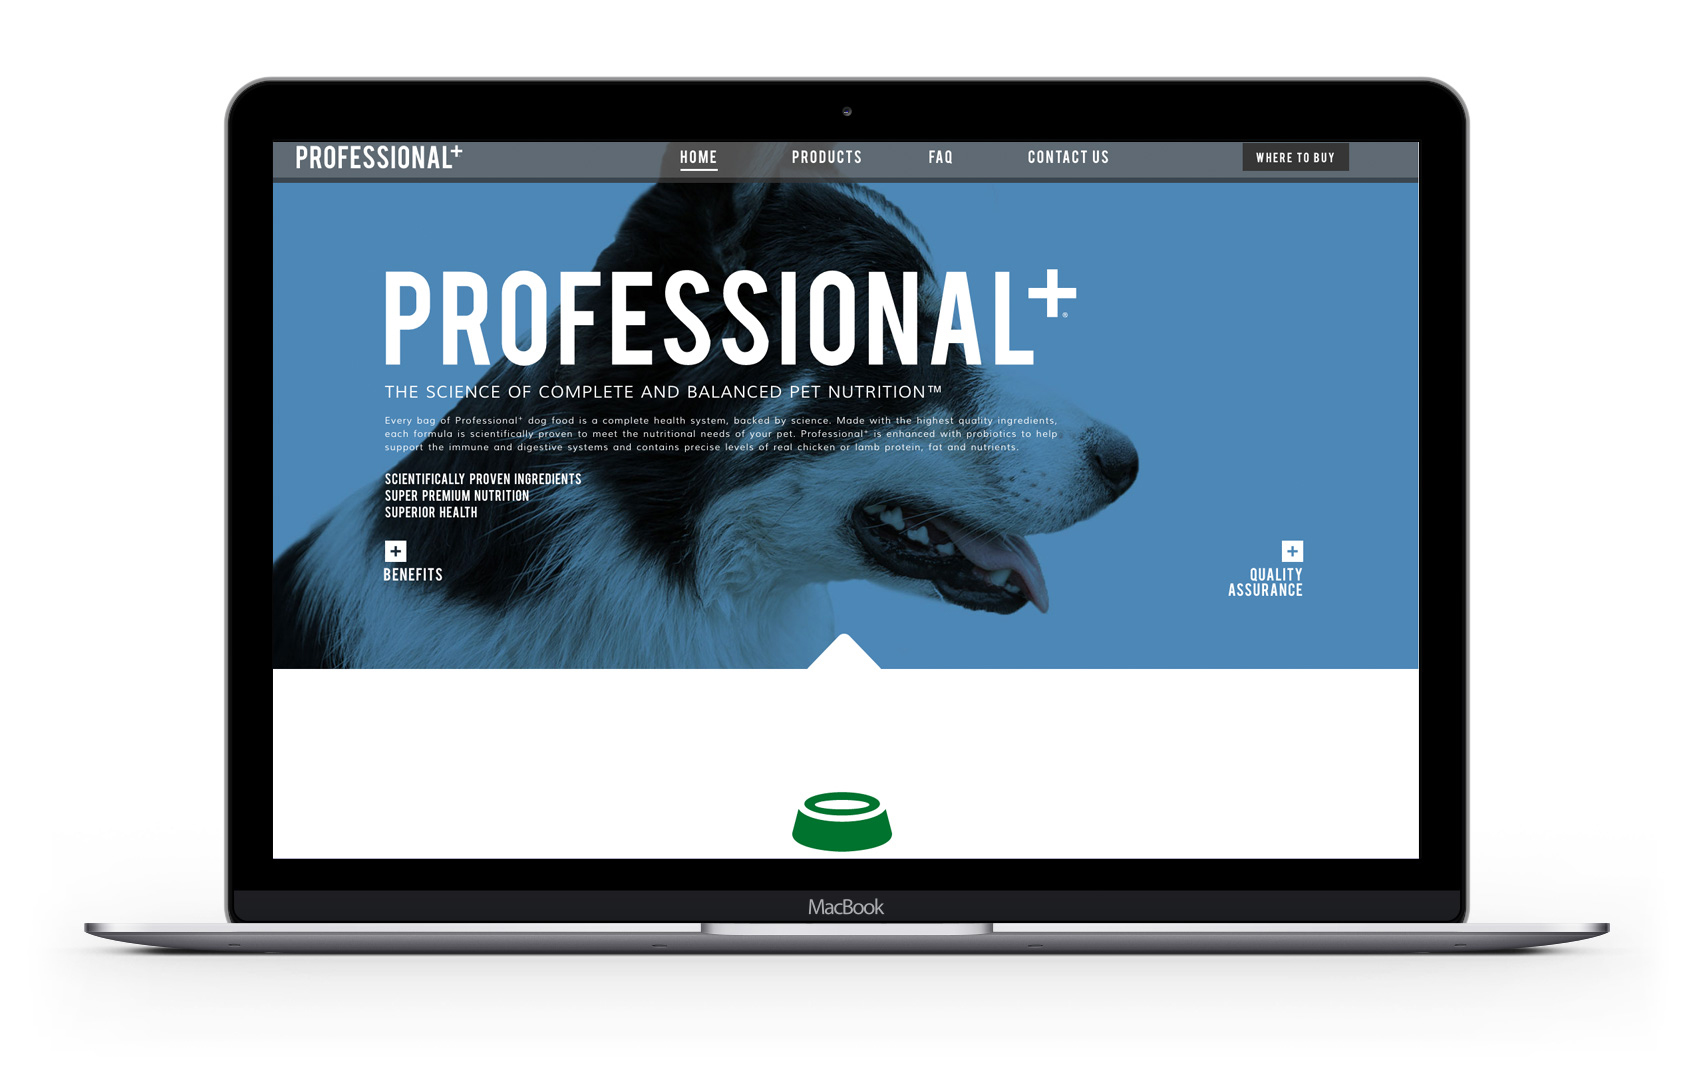 Professional+ Formula for Dogs home page of their website